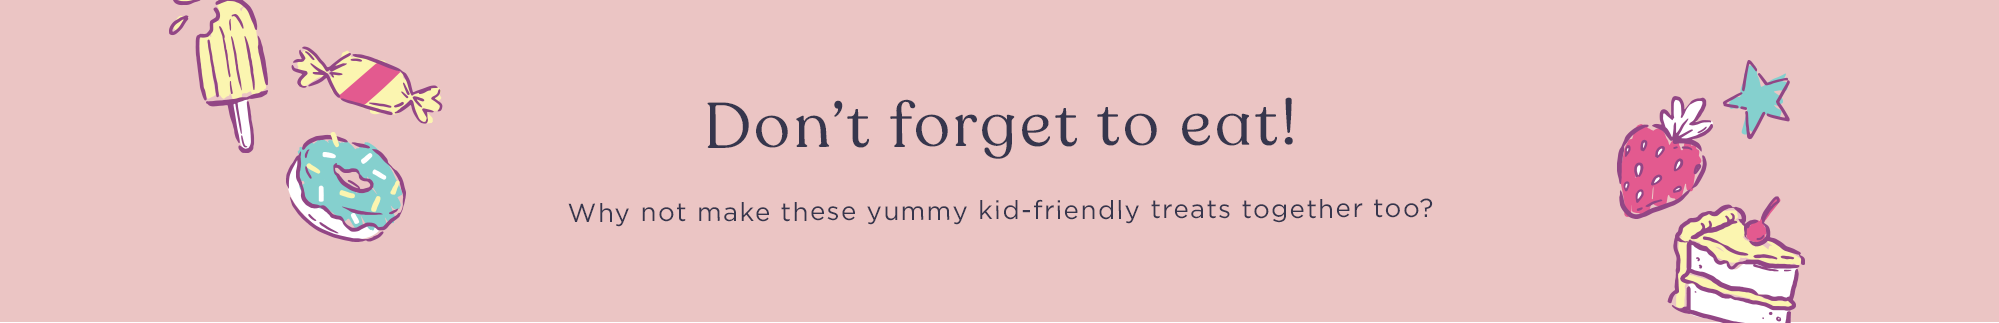 Don't forget to eat! Why not make these yummy kid-friendly treats together too?